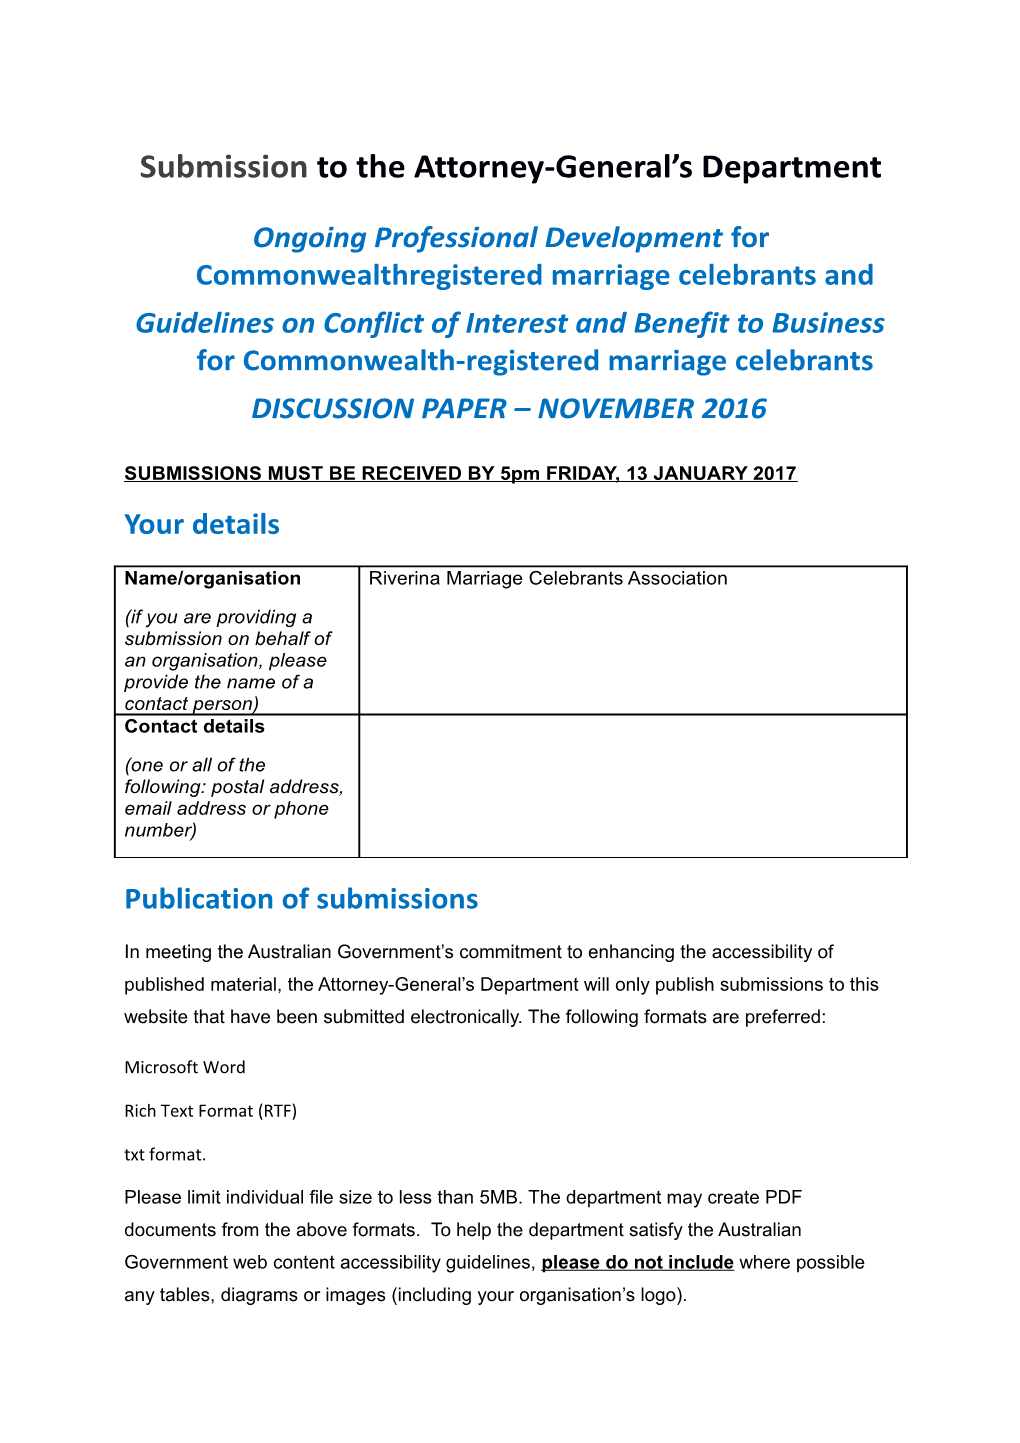 Submissions to OPD for Marriage Celebrants Consultation - Riverina Marriage Celebrants